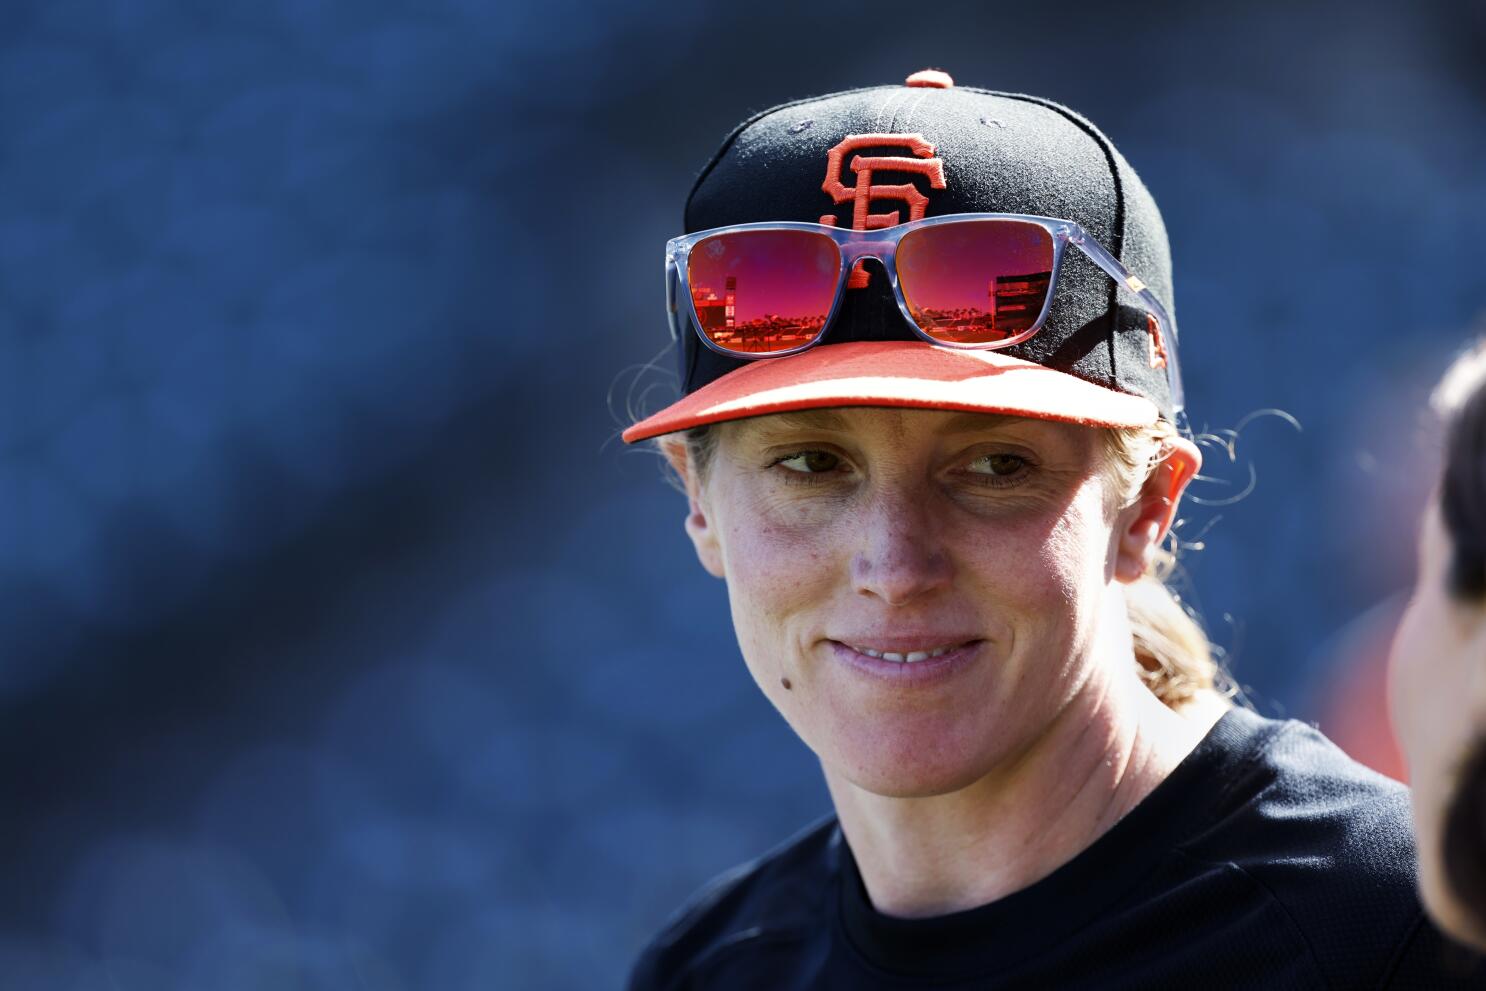 Alyssa Nakken, the first female on-field coach in the majors, interviews  for Giants' manager job - The Boston Globe